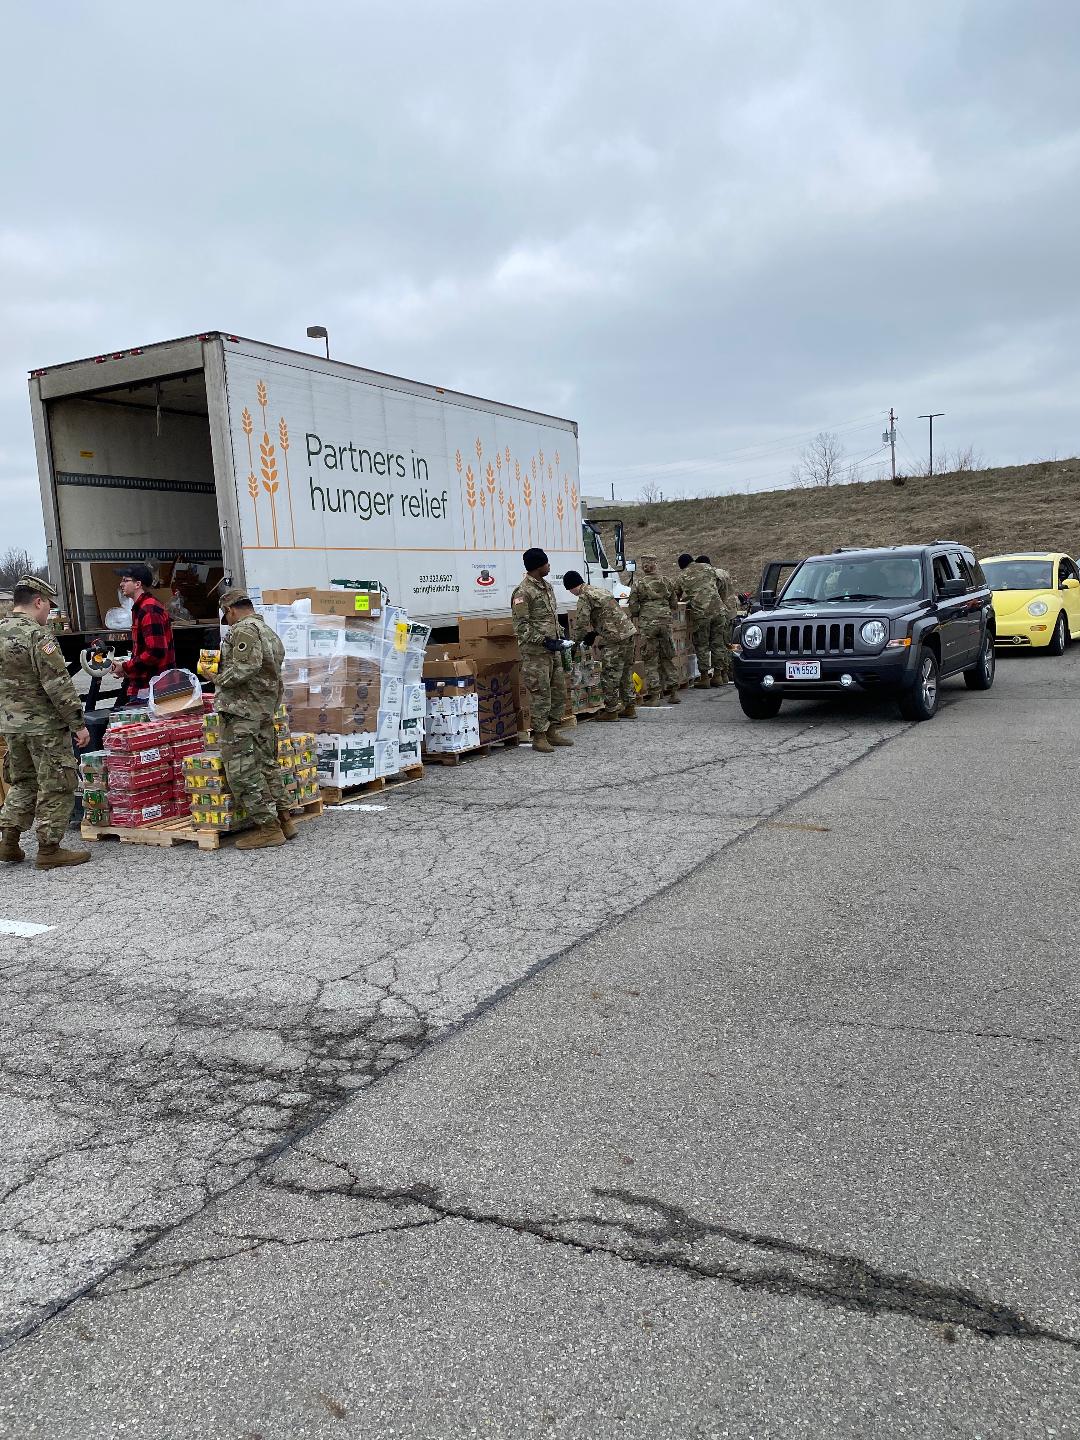 Soldiers pass out supplies from the Partners in Need semi to cars in drive through.